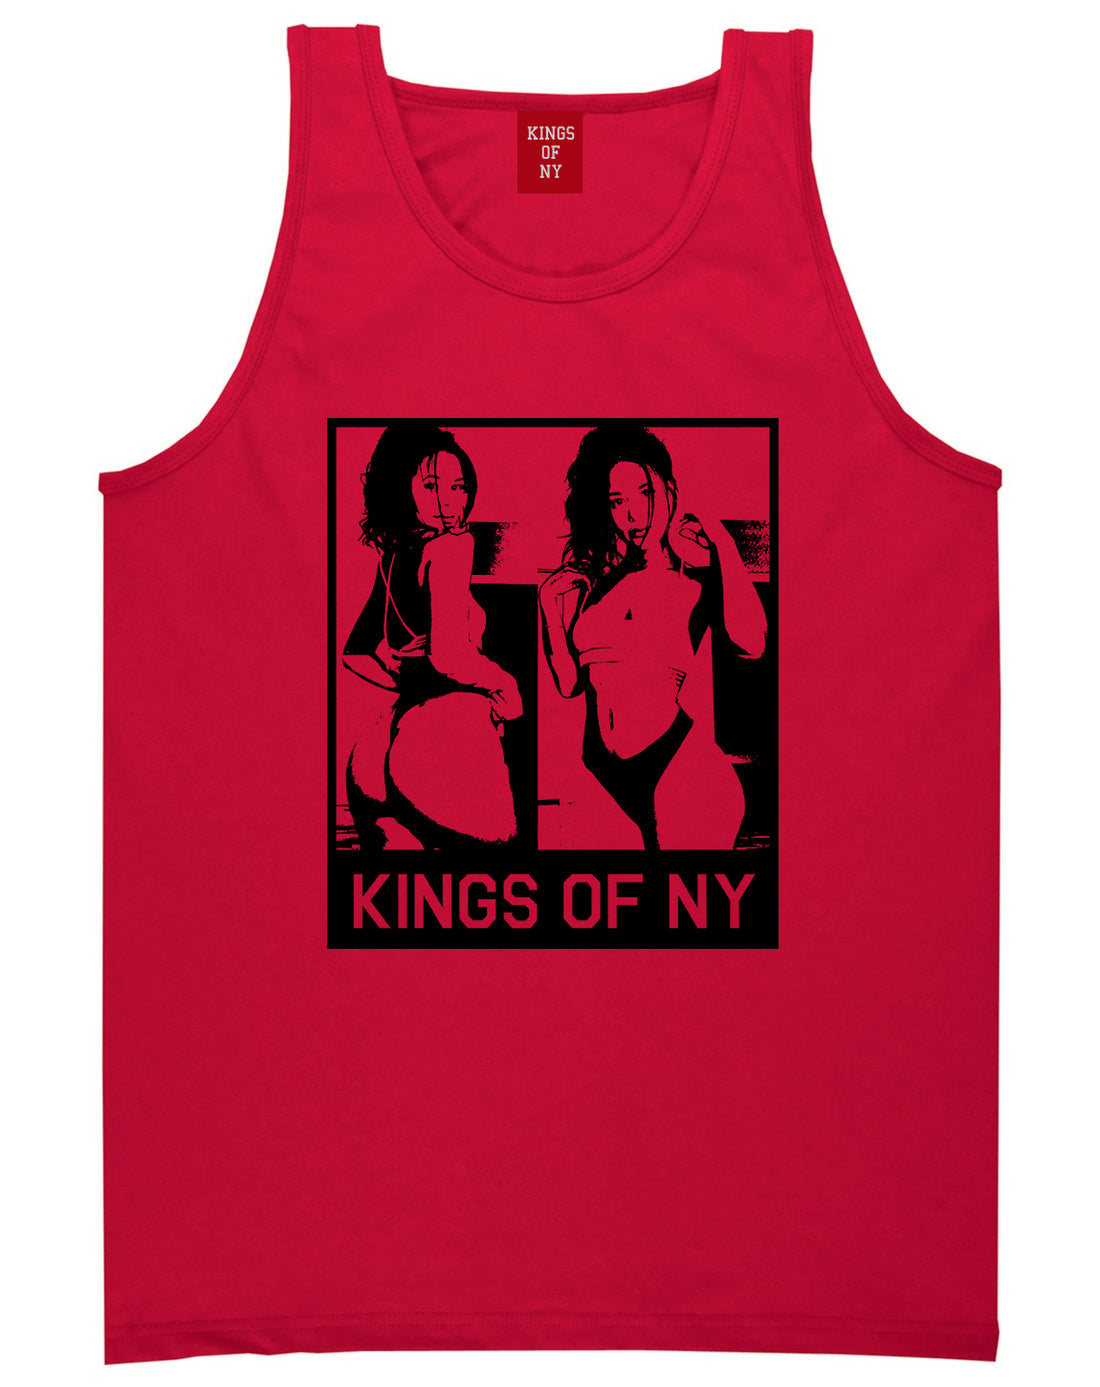 Slide In Her DMs Tank Top Shirt in Red